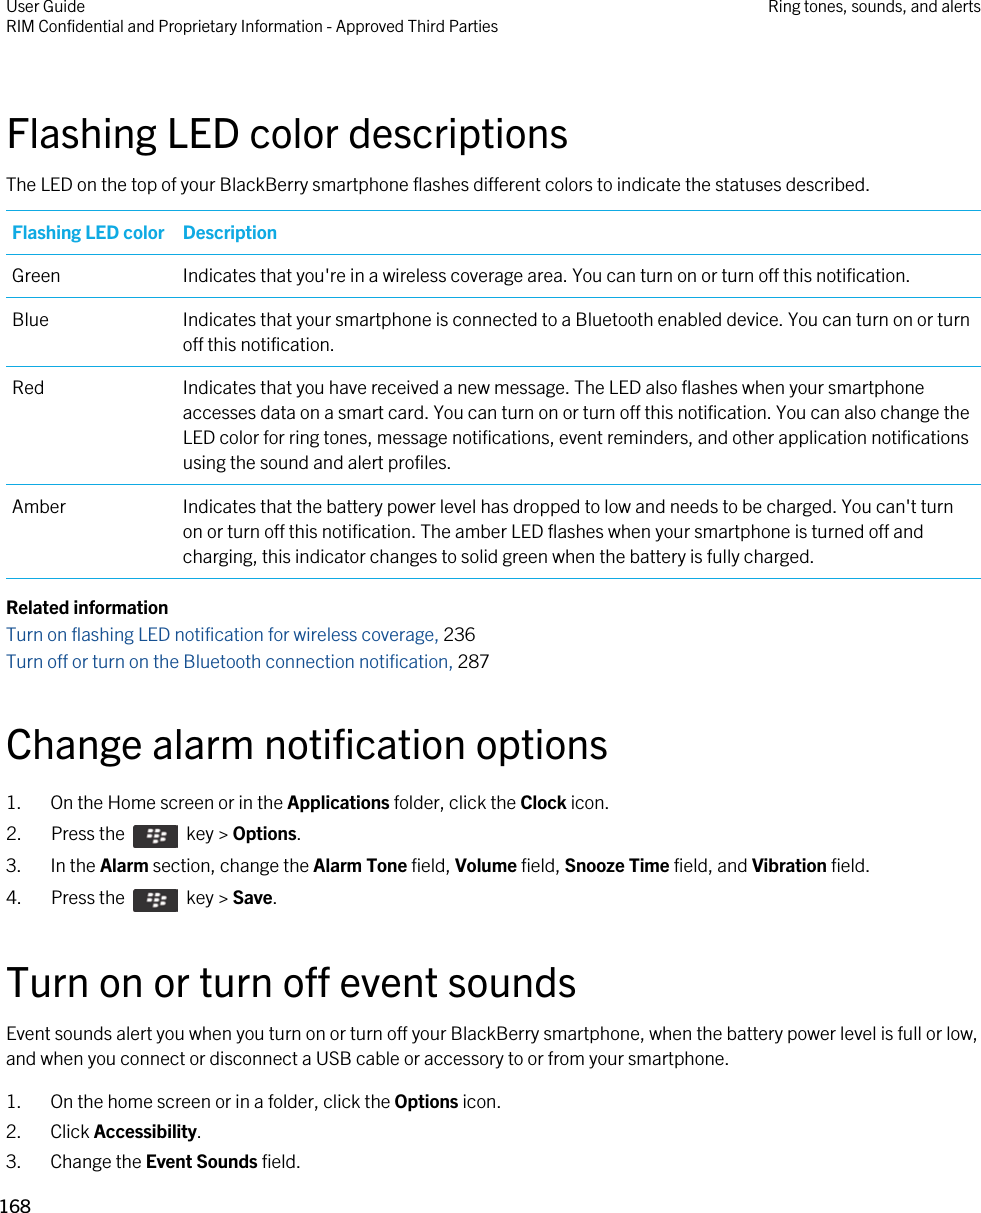 Flashing LED color descriptionsThe LED on the top of your BlackBerry smartphone flashes different colors to indicate the statuses described.Flashing LED color DescriptionGreen Indicates that you&apos;re in a wireless coverage area. You can turn on or turn off this notification.Blue Indicates that your smartphone is connected to a Bluetooth enabled device. You can turn on or turn off this notification.Red Indicates that you have received a new message. The LED also flashes when your smartphone accesses data on a smart card. You can turn on or turn off this notification. You can also change the LED color for ring tones, message notifications, event reminders, and other application notifications using the sound and alert profiles.Amber Indicates that the battery power level has dropped to low and needs to be charged. You can&apos;t turn on or turn off this notification. The amber LED flashes when your smartphone is turned off and charging, this indicator changes to solid green when the battery is fully charged.Related informationTurn on flashing LED notification for wireless coverage, 236Turn off or turn on the Bluetooth connection notification, 287Change alarm notification options1. On the Home screen or in the Applications folder, click the Clock icon.2.  Press the    key &gt; Options. 3. In the Alarm section, change the Alarm Tone field, Volume field, Snooze Time field, and Vibration field.4.  Press the    key &gt; Save. Turn on or turn off event soundsEvent sounds alert you when you turn on or turn off your BlackBerry smartphone, when the battery power level is full or low, and when you connect or disconnect a USB cable or accessory to or from your smartphone.1. On the home screen or in a folder, click the Options icon.2. Click Accessibility.3. Change the Event Sounds field.User GuideRIM Confidential and Proprietary Information - Approved Third Parties Ring tones, sounds, and alerts168 